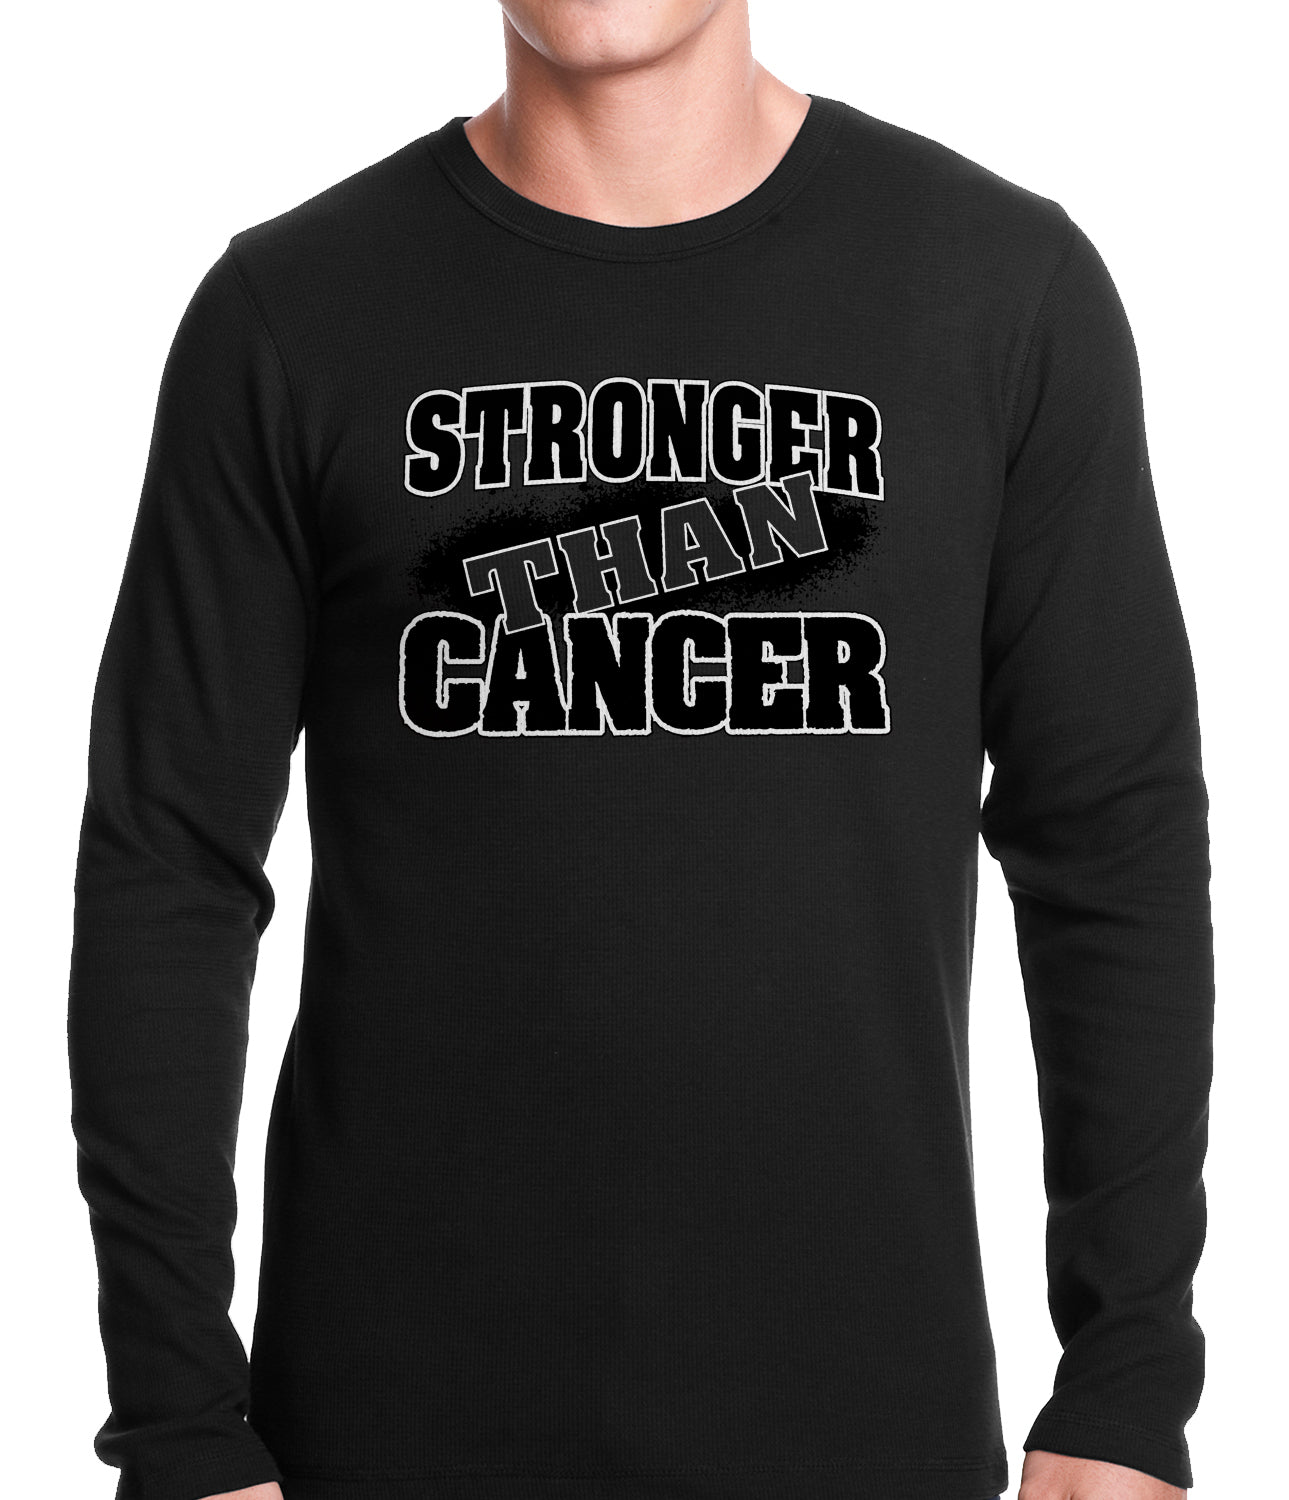 Stronger Than Cancer Thermal Shirt